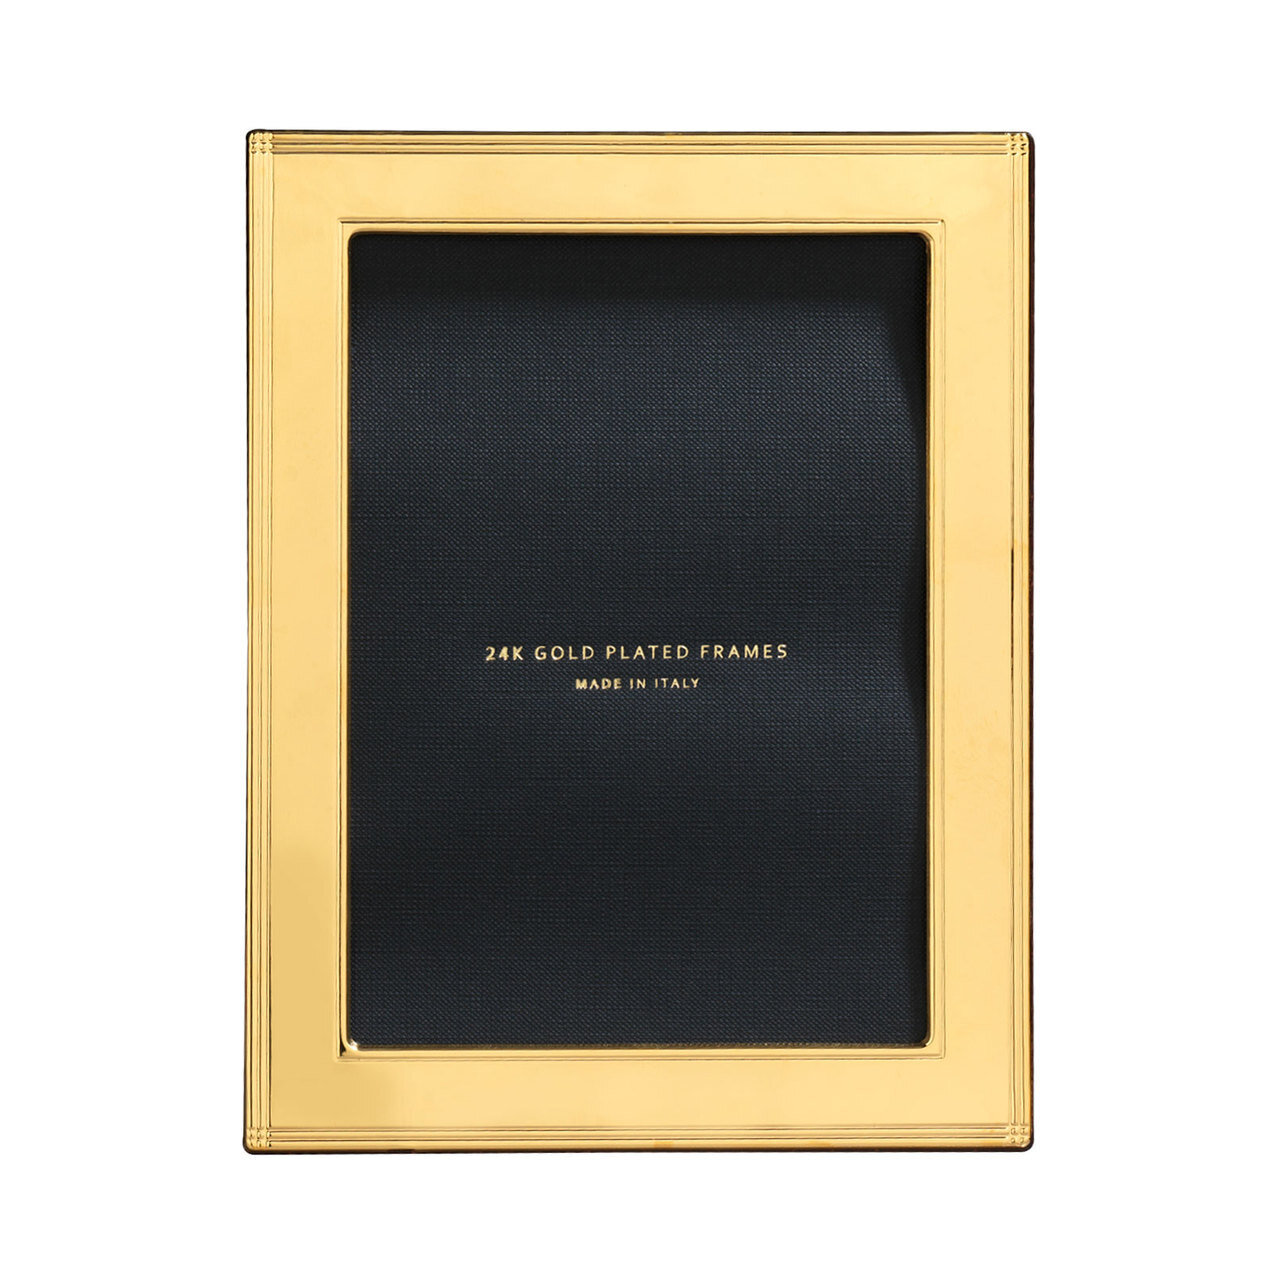 Cunill Madison 4 x 6 Inch Picture Frame - 24k Gold Plated 0.5 Microns